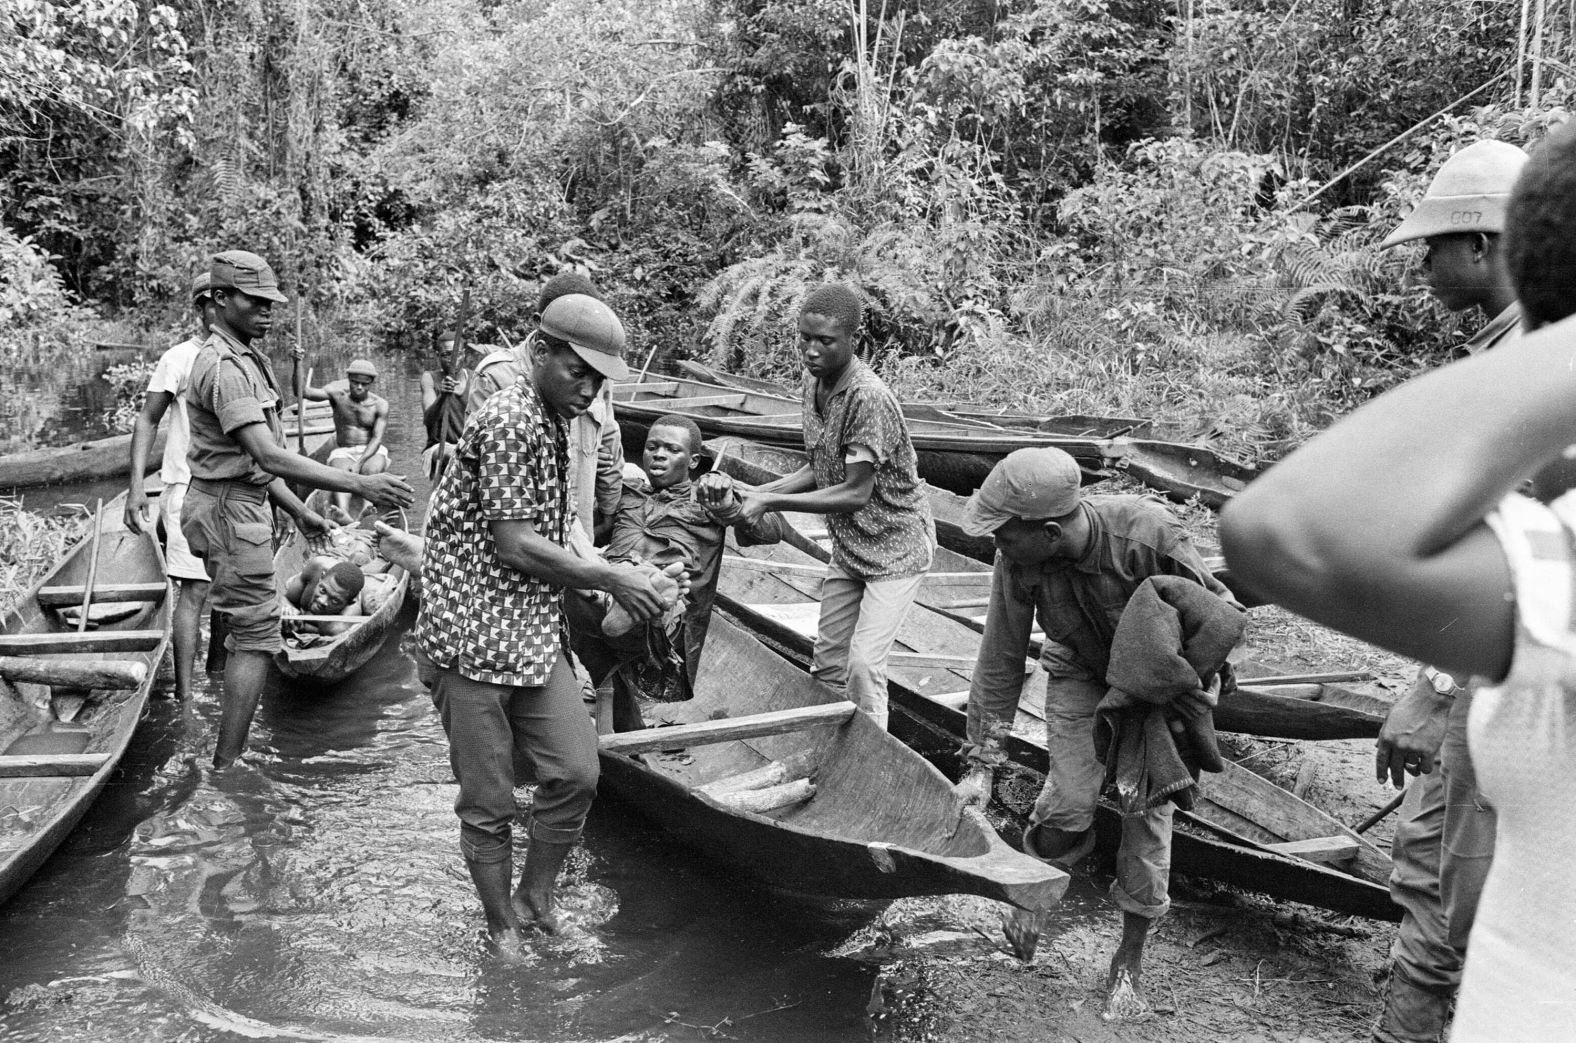 Wounded Biafran soldiers are transported across a river in June 1968.